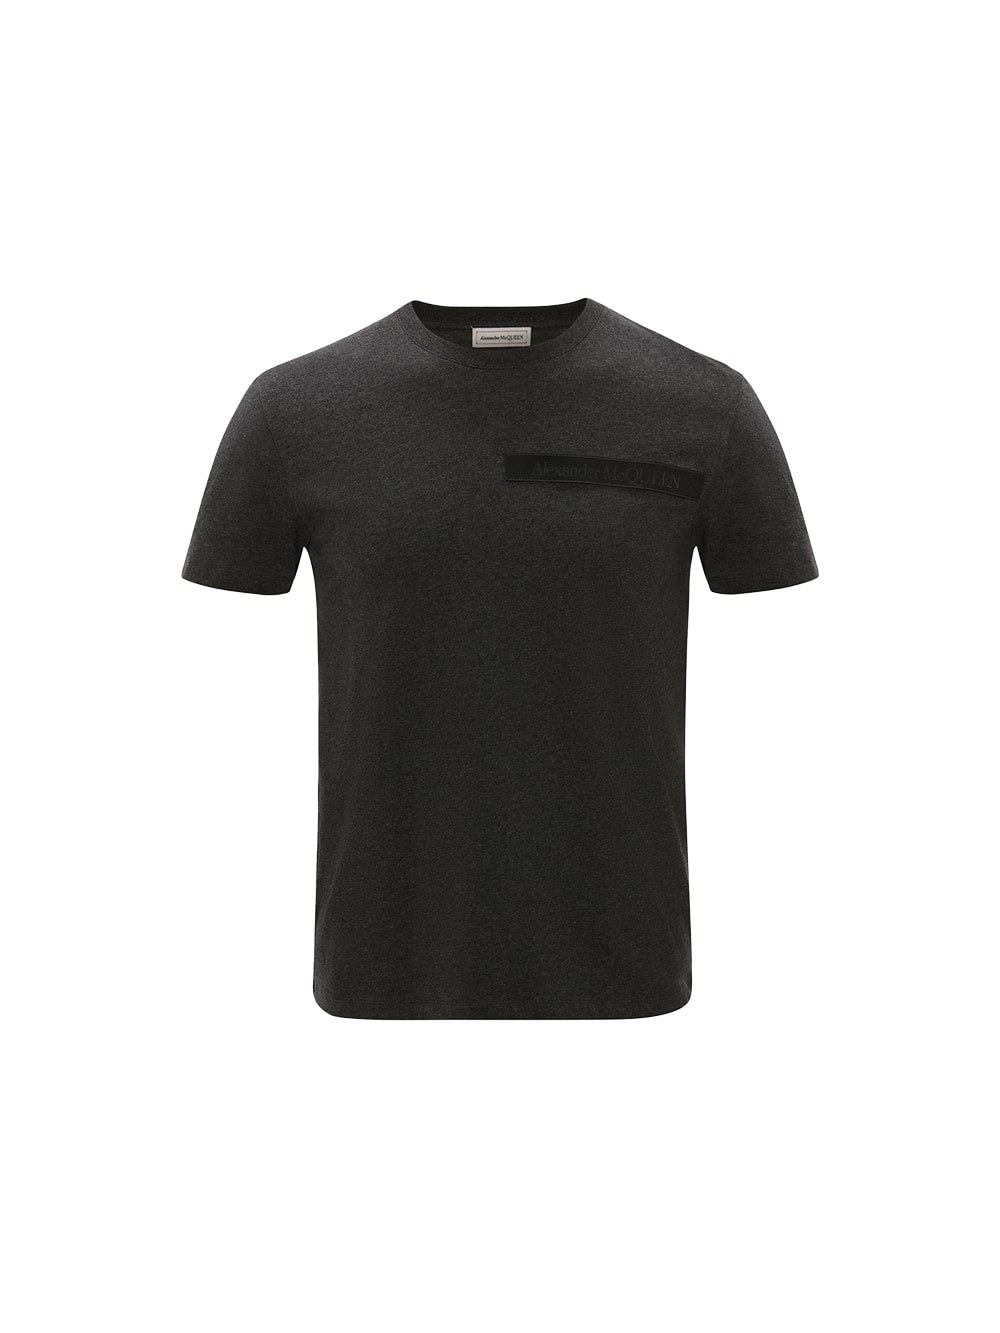 Alexander McQueen Man T-shirt With Selvedge Logo Band In Charcoal